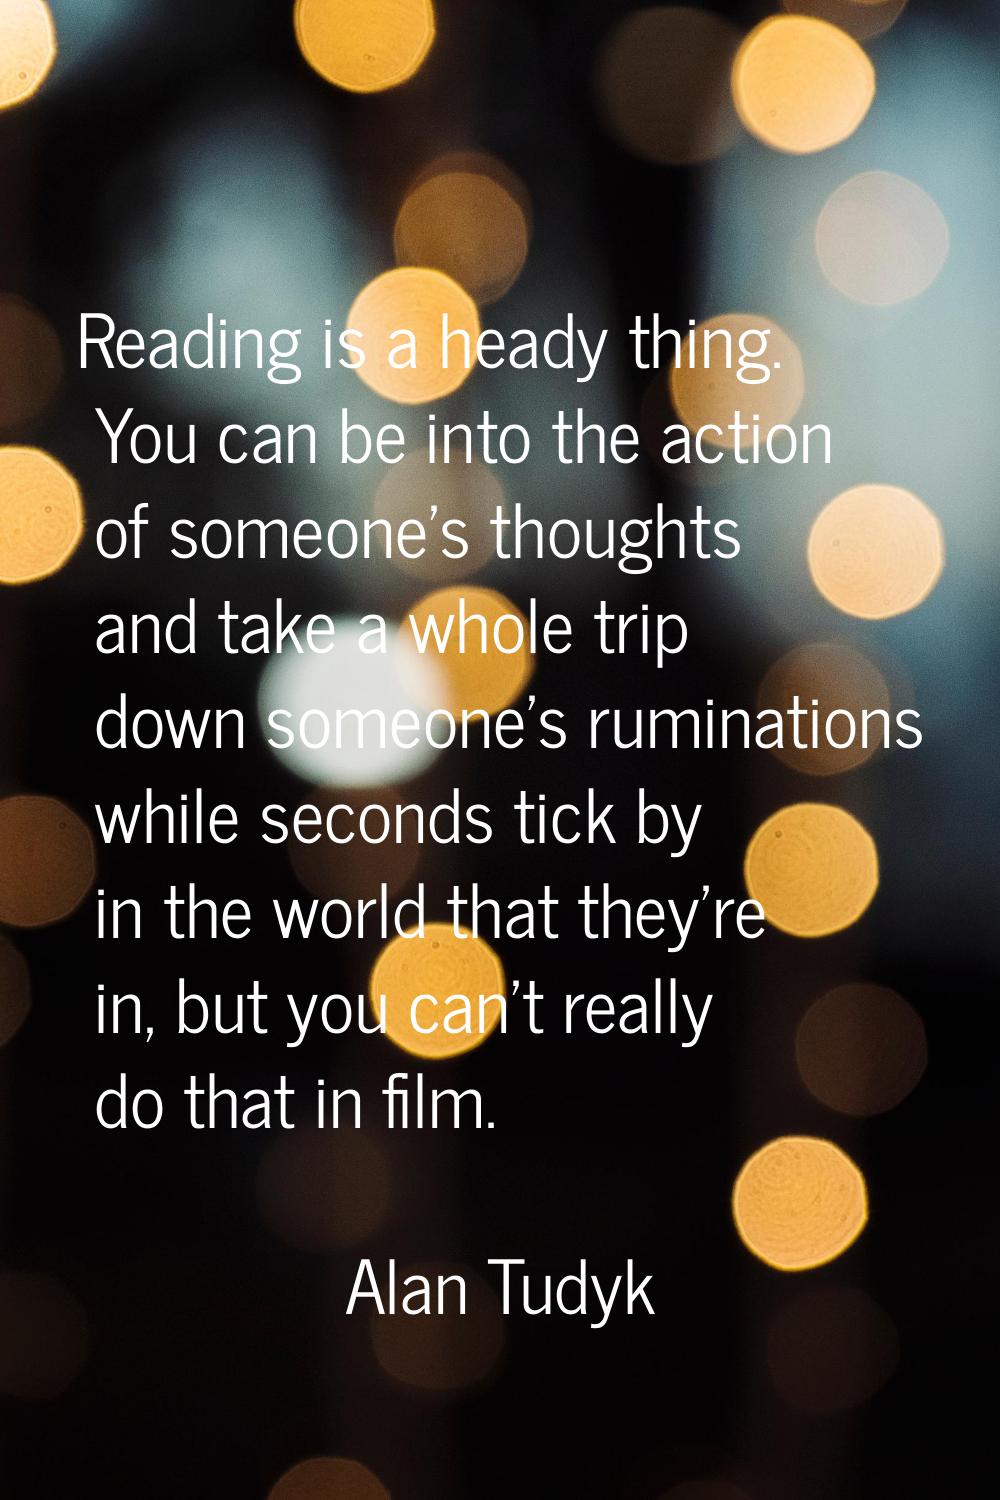 Reading is a heady thing. You can be into the action of someone's thoughts and take a whole trip do